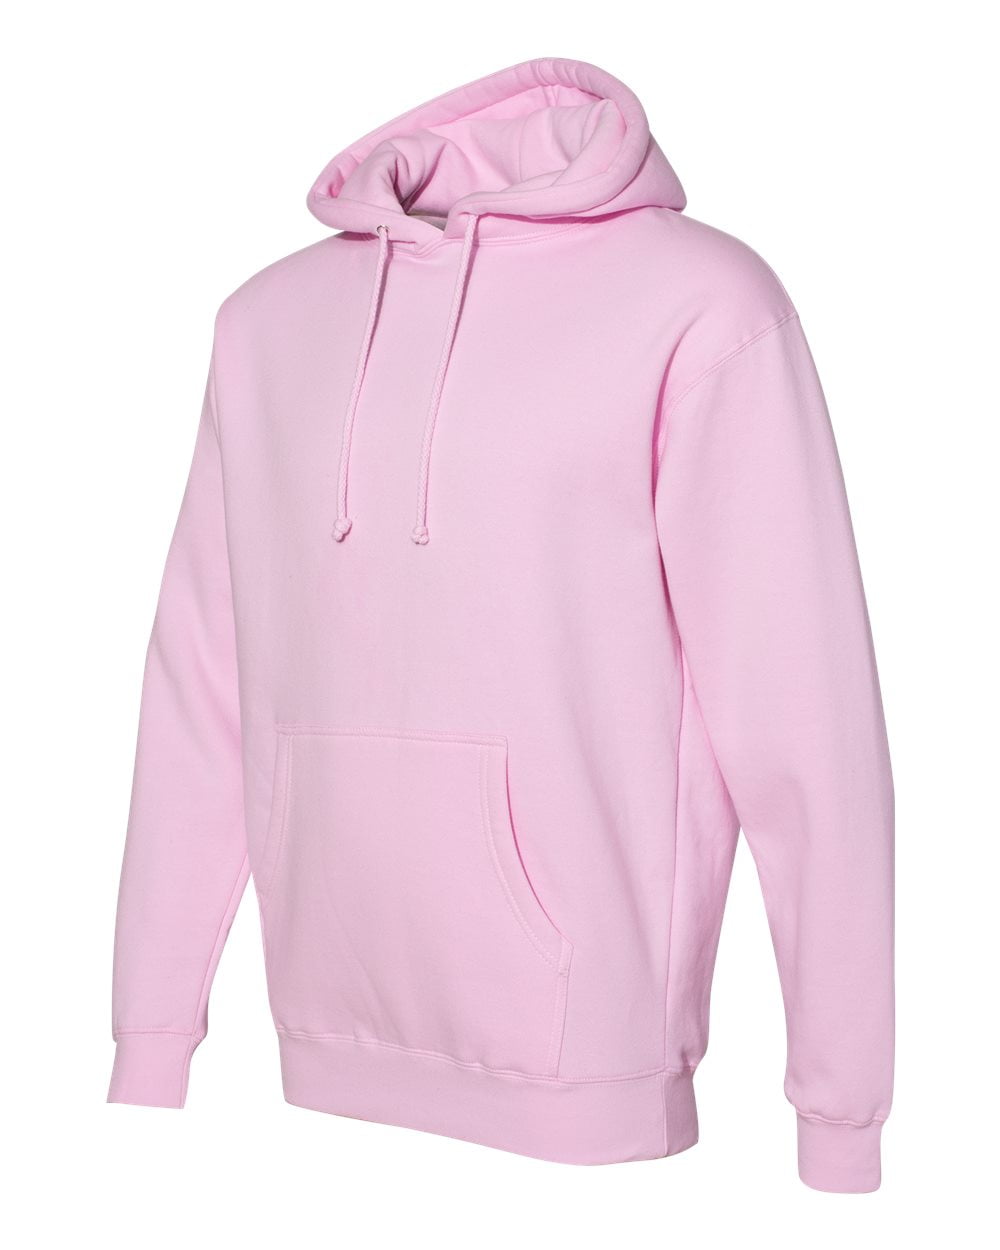 Independent Trading Co. Heavyweight Hooded Sweatshirt IND4000 Light Pink XS